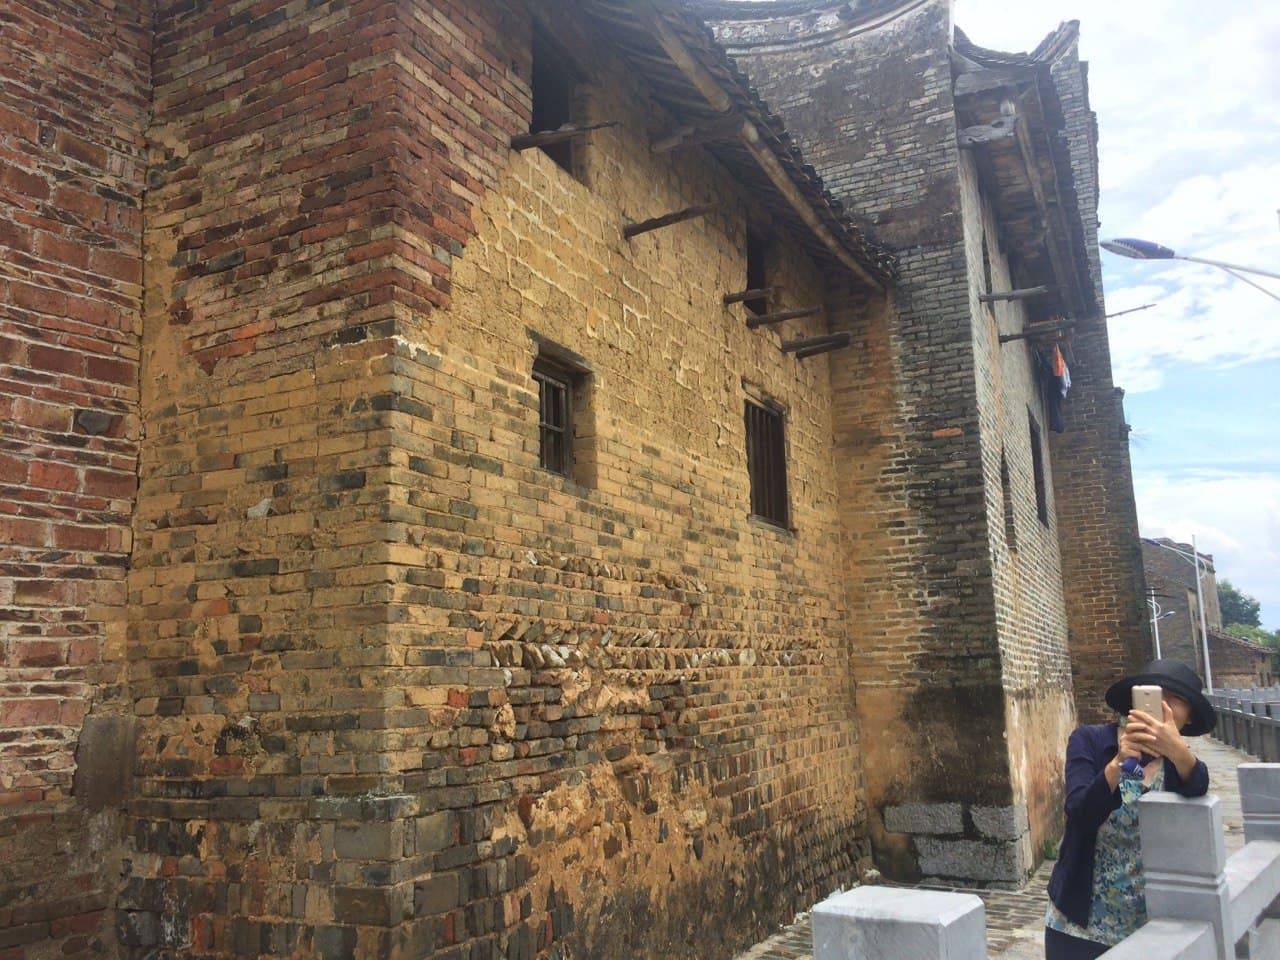 The outside wall of the second village